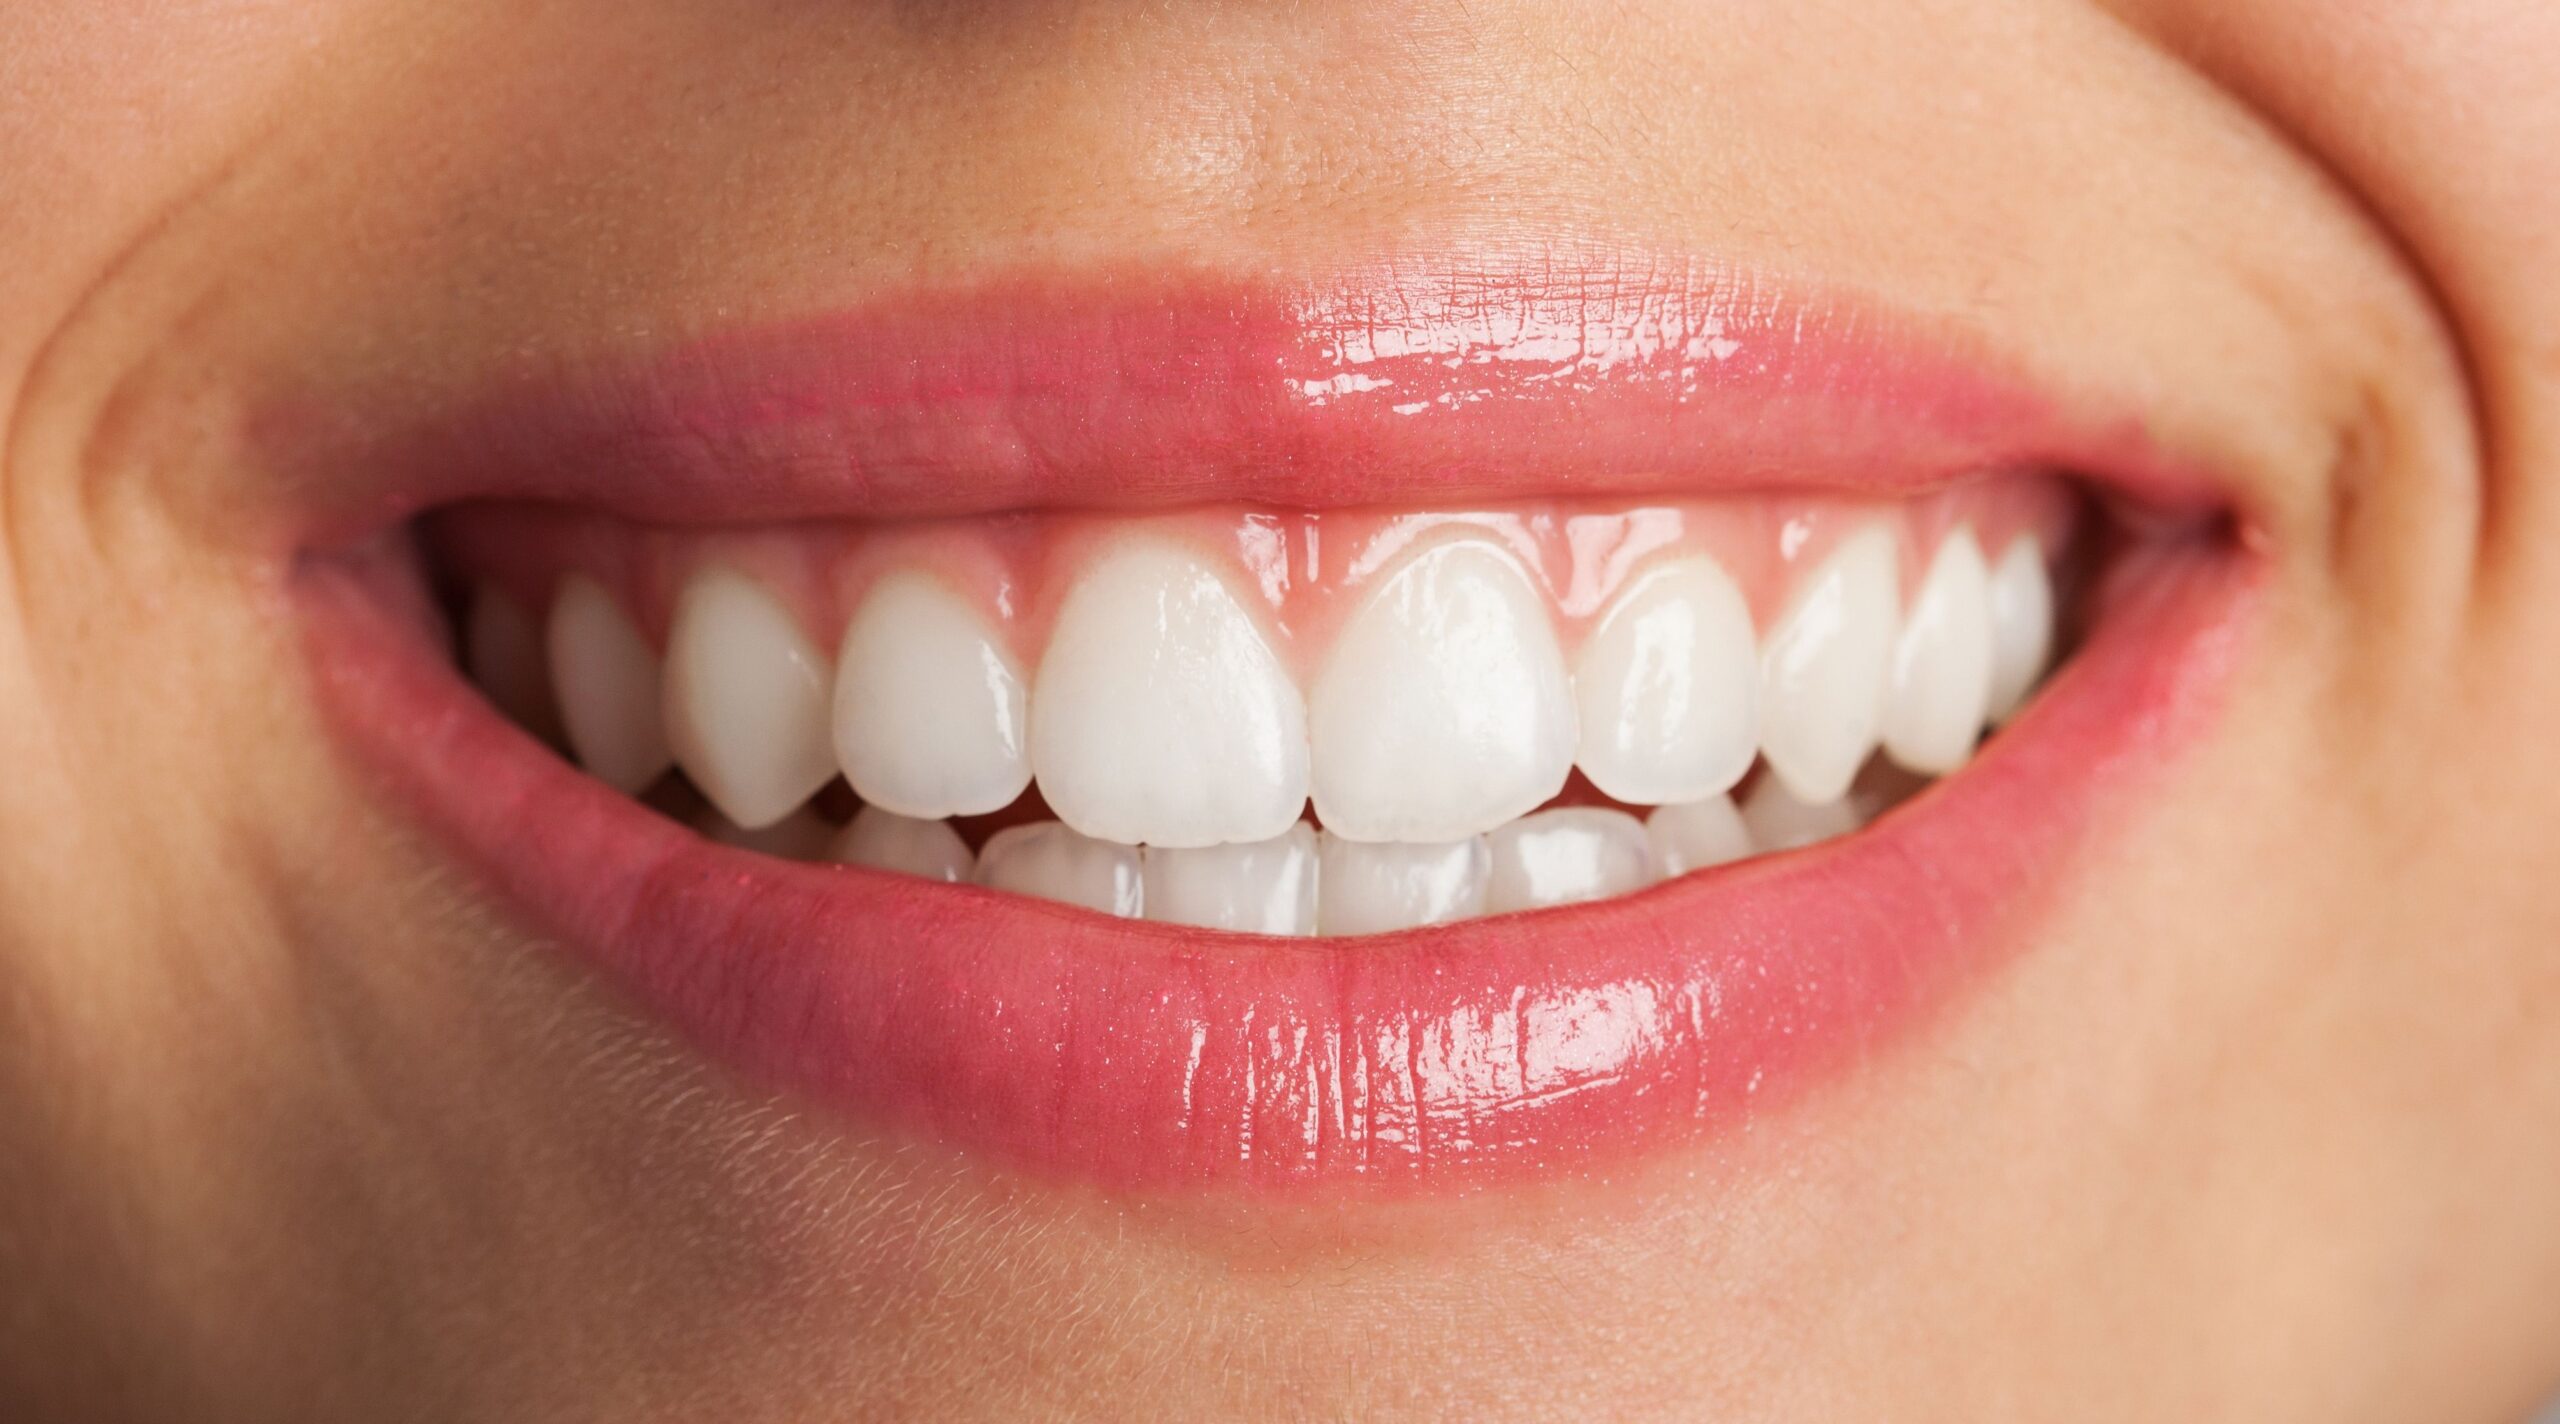 What Precautions Should I Take After Teeth Whitening?